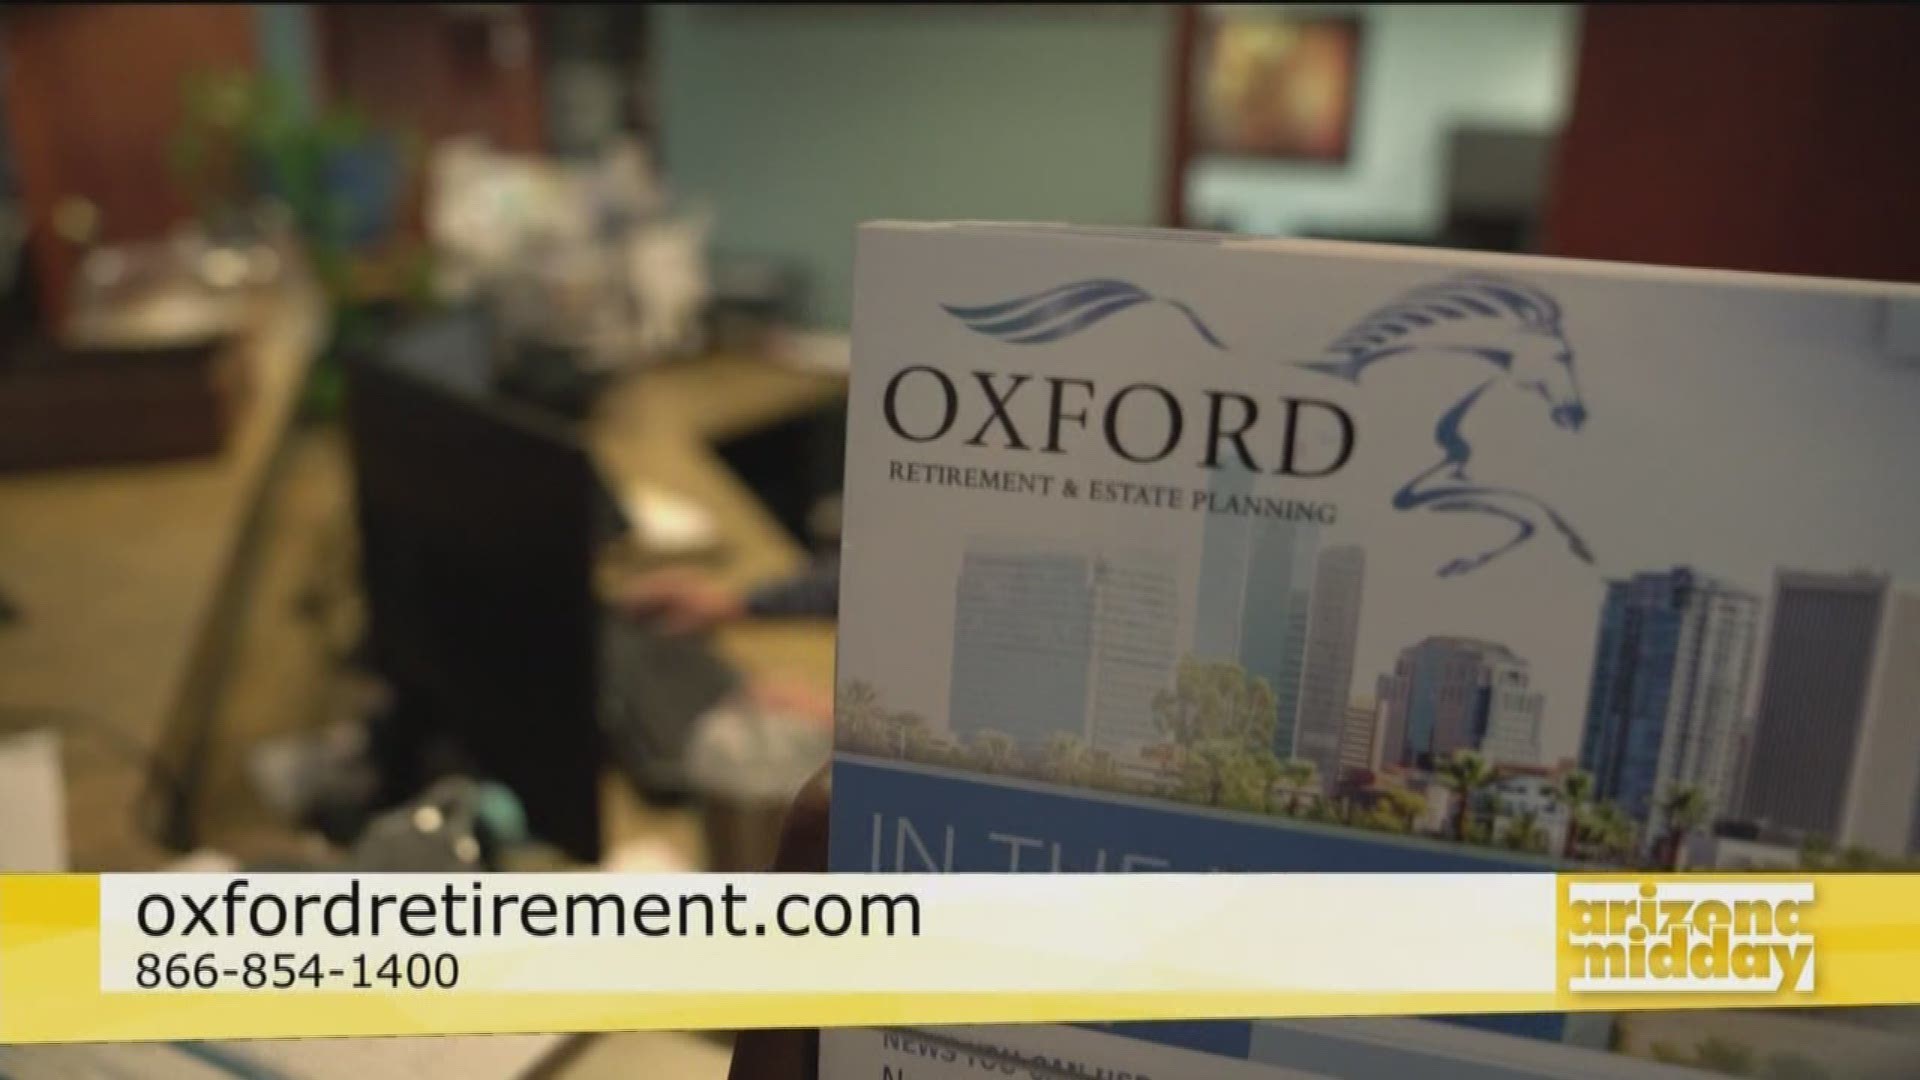 Michael Oxford with Oxford Retirement shares tips for a smart and simple retirement plan.